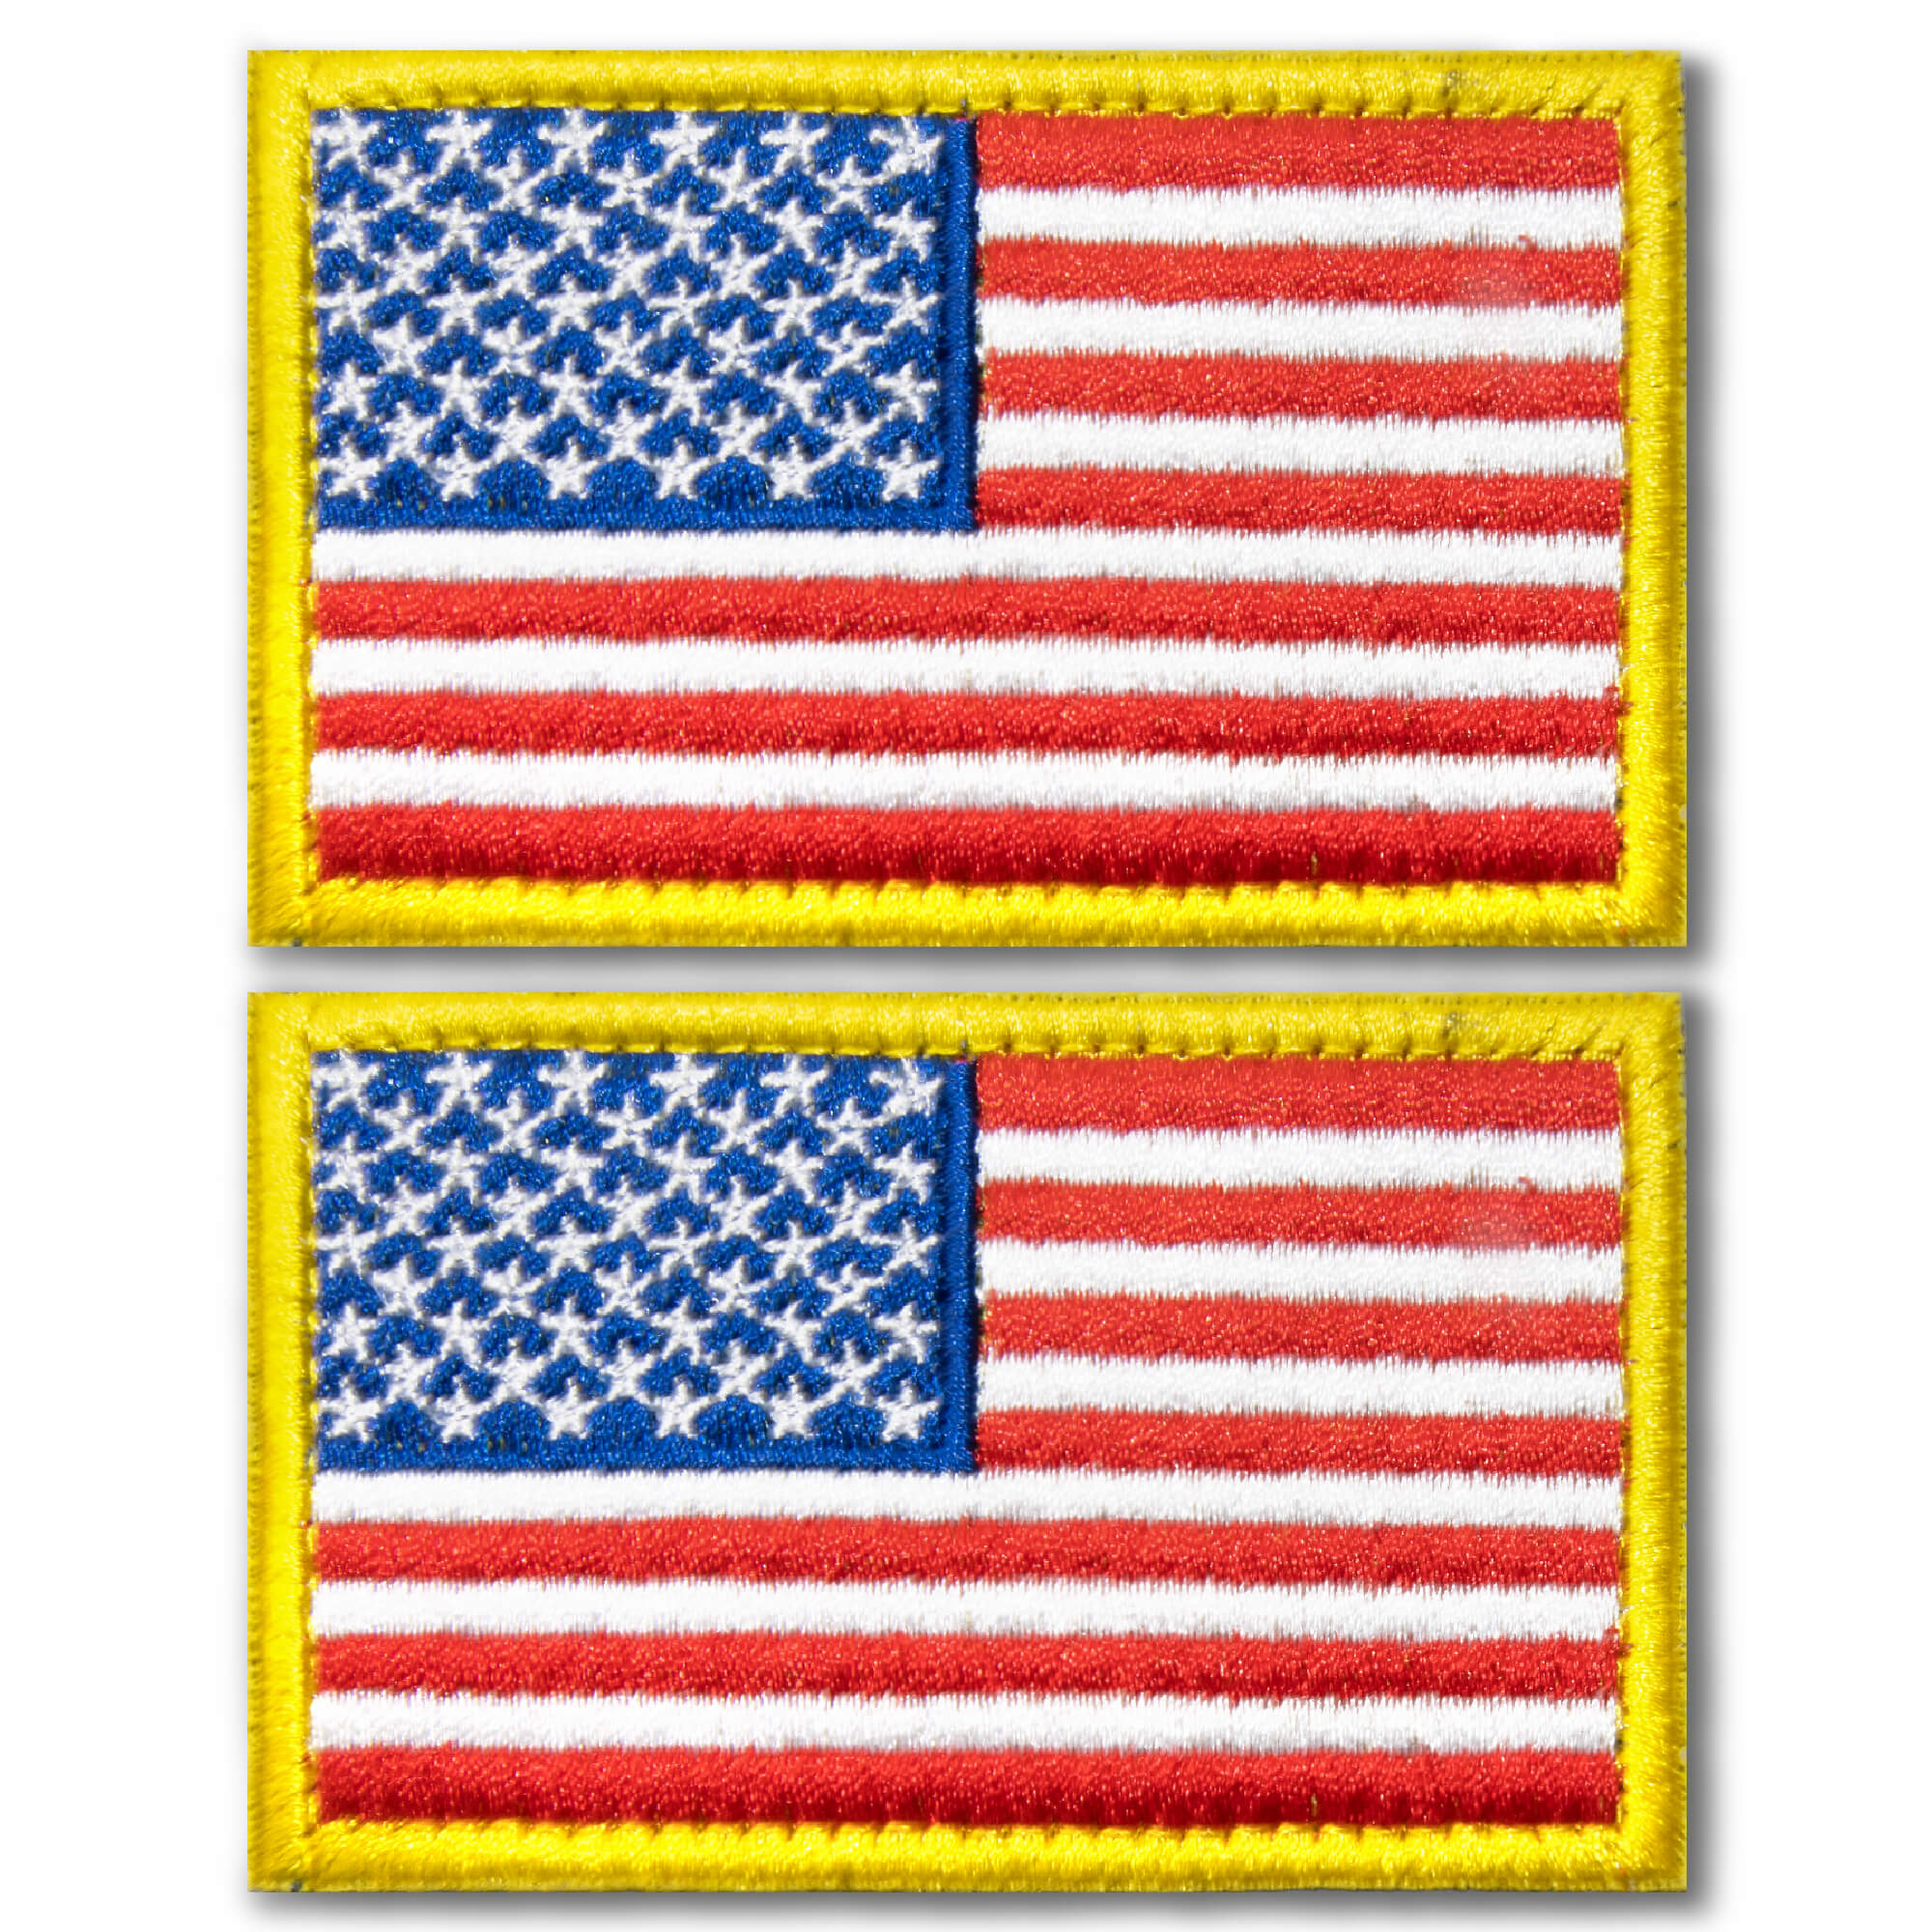 Anley Tactical USA Flag Patches (2 Pack) Forward & Reversed - 2x 3  American Flag Military Uniform Emblem Patch - Loop & Hook Fasteners Attach  to Tactical Hats and Gears 